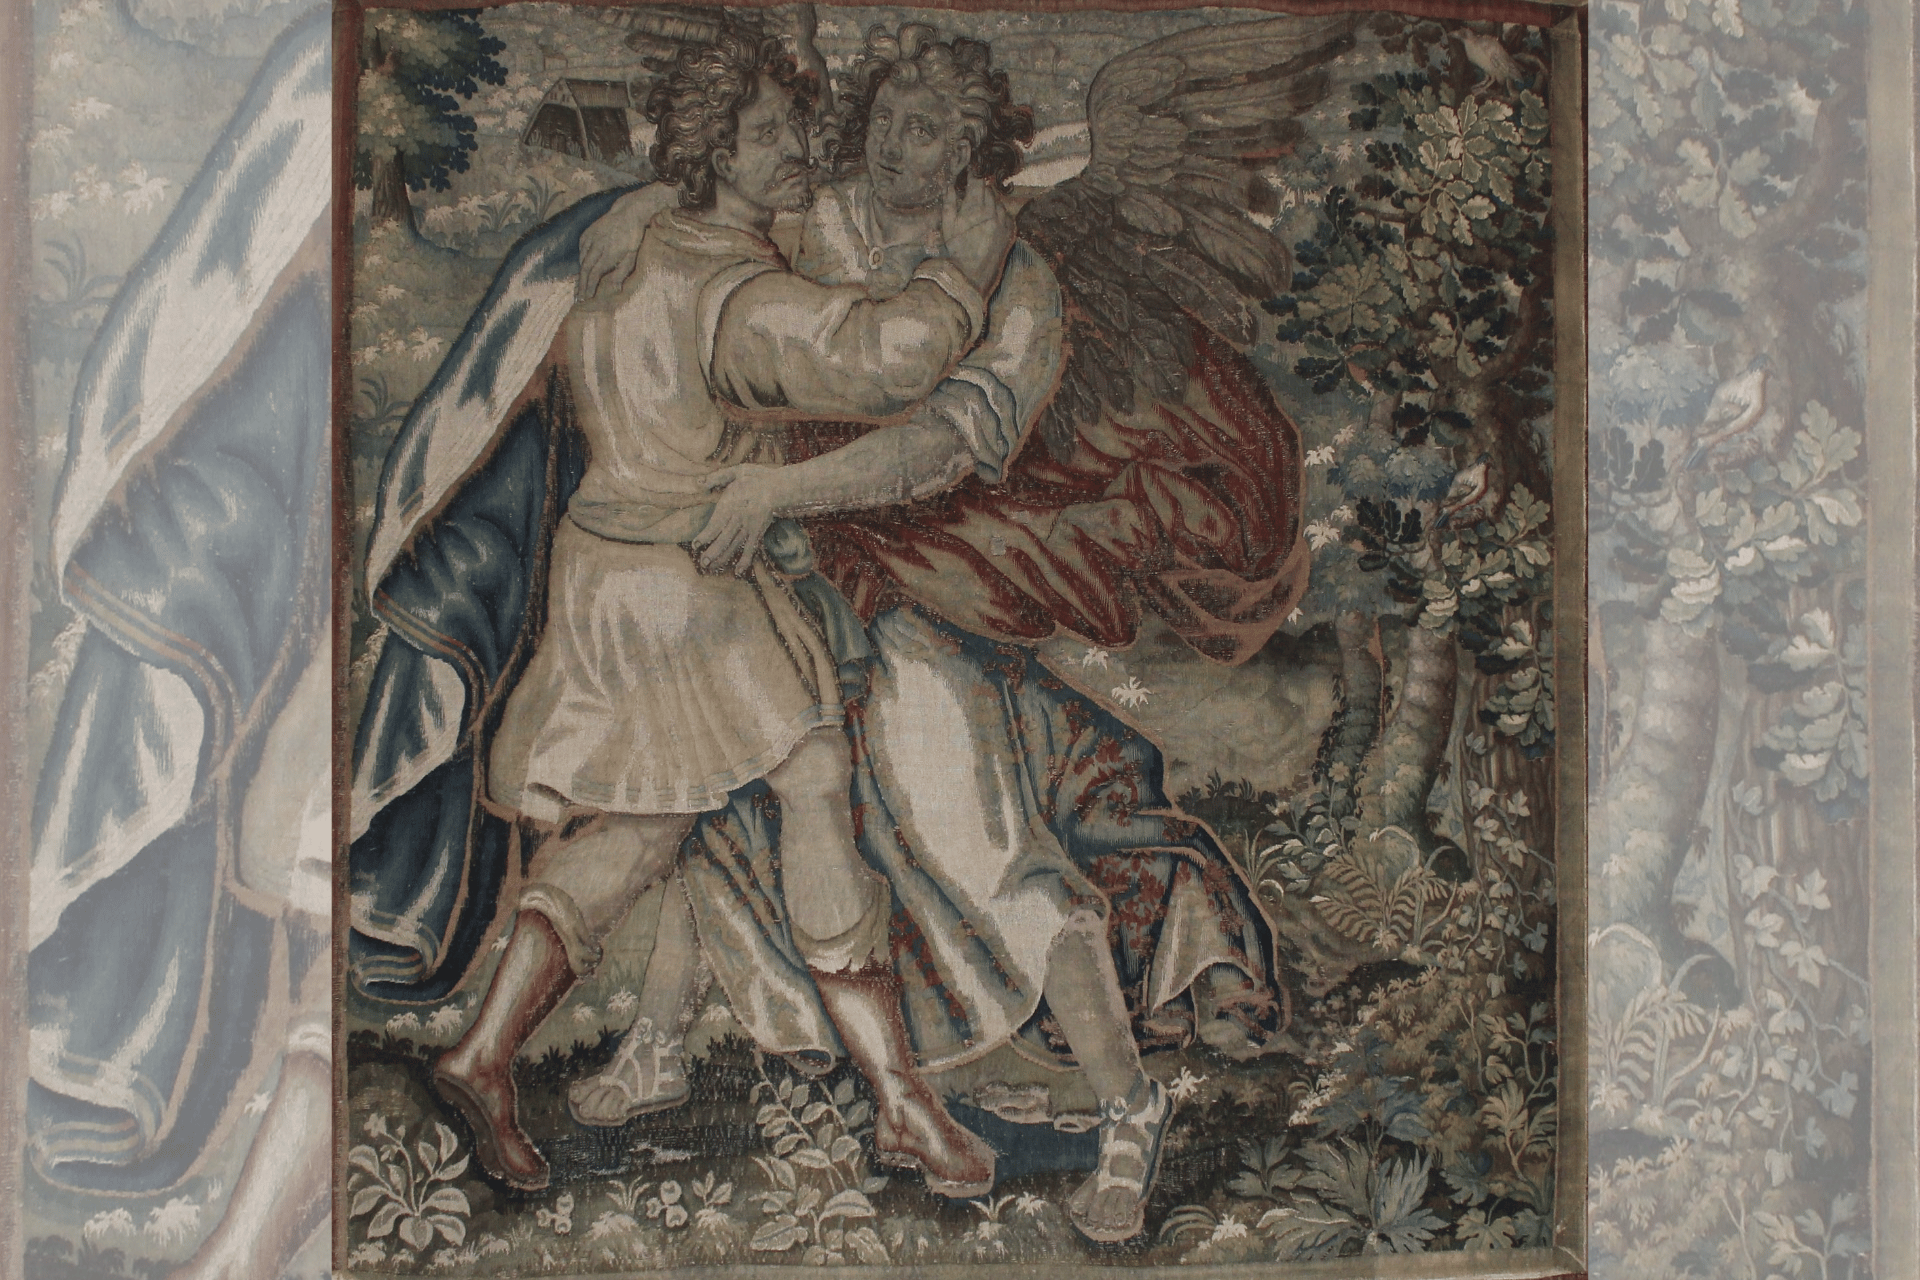 A part of a tapestry showing Jacob wrestling an Angel.